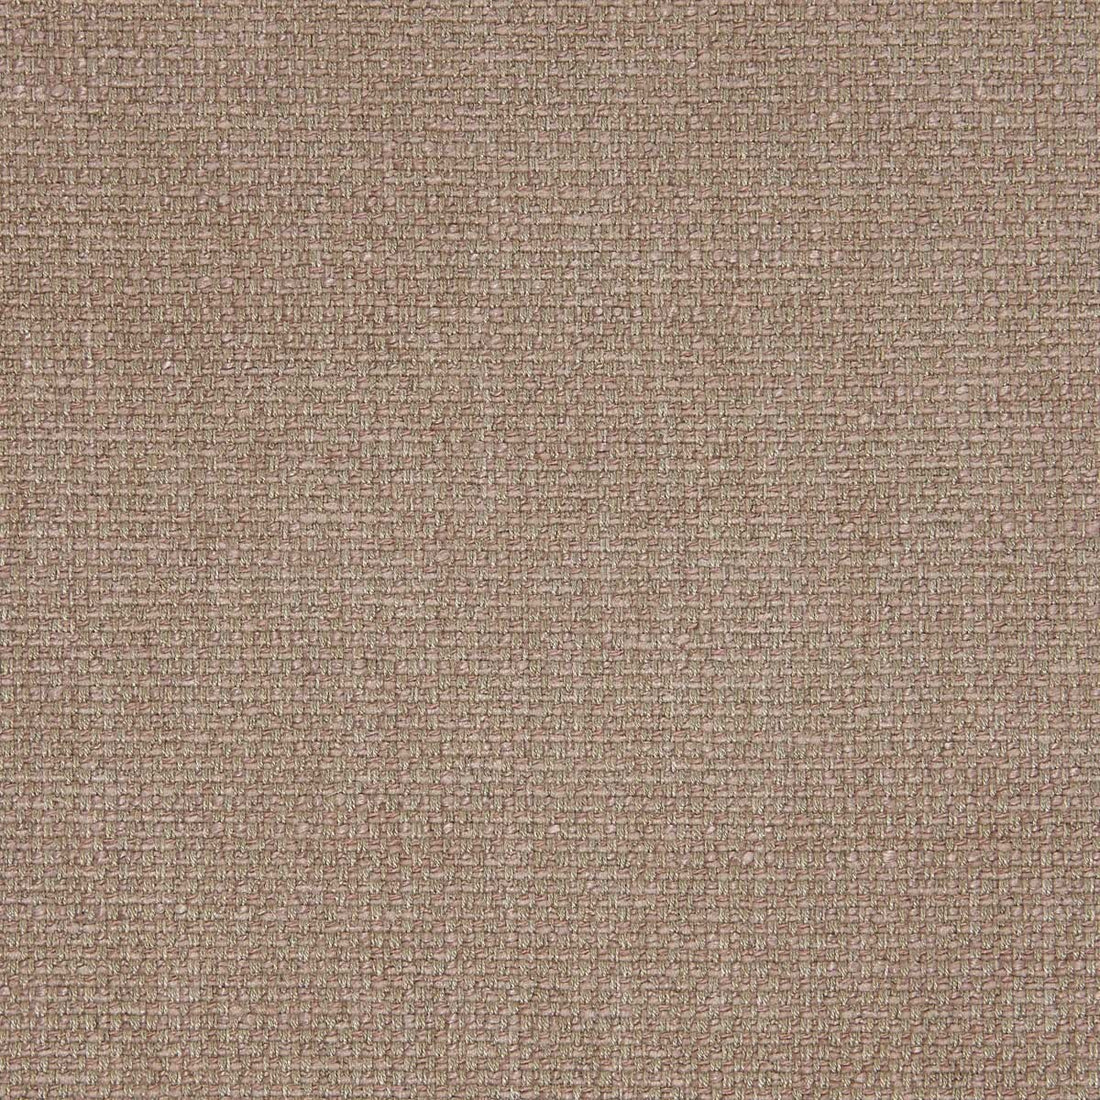 Godai fabric in 2 color - pattern LZ-30349.02.0 - by Kravet Design in the Lizzo collection